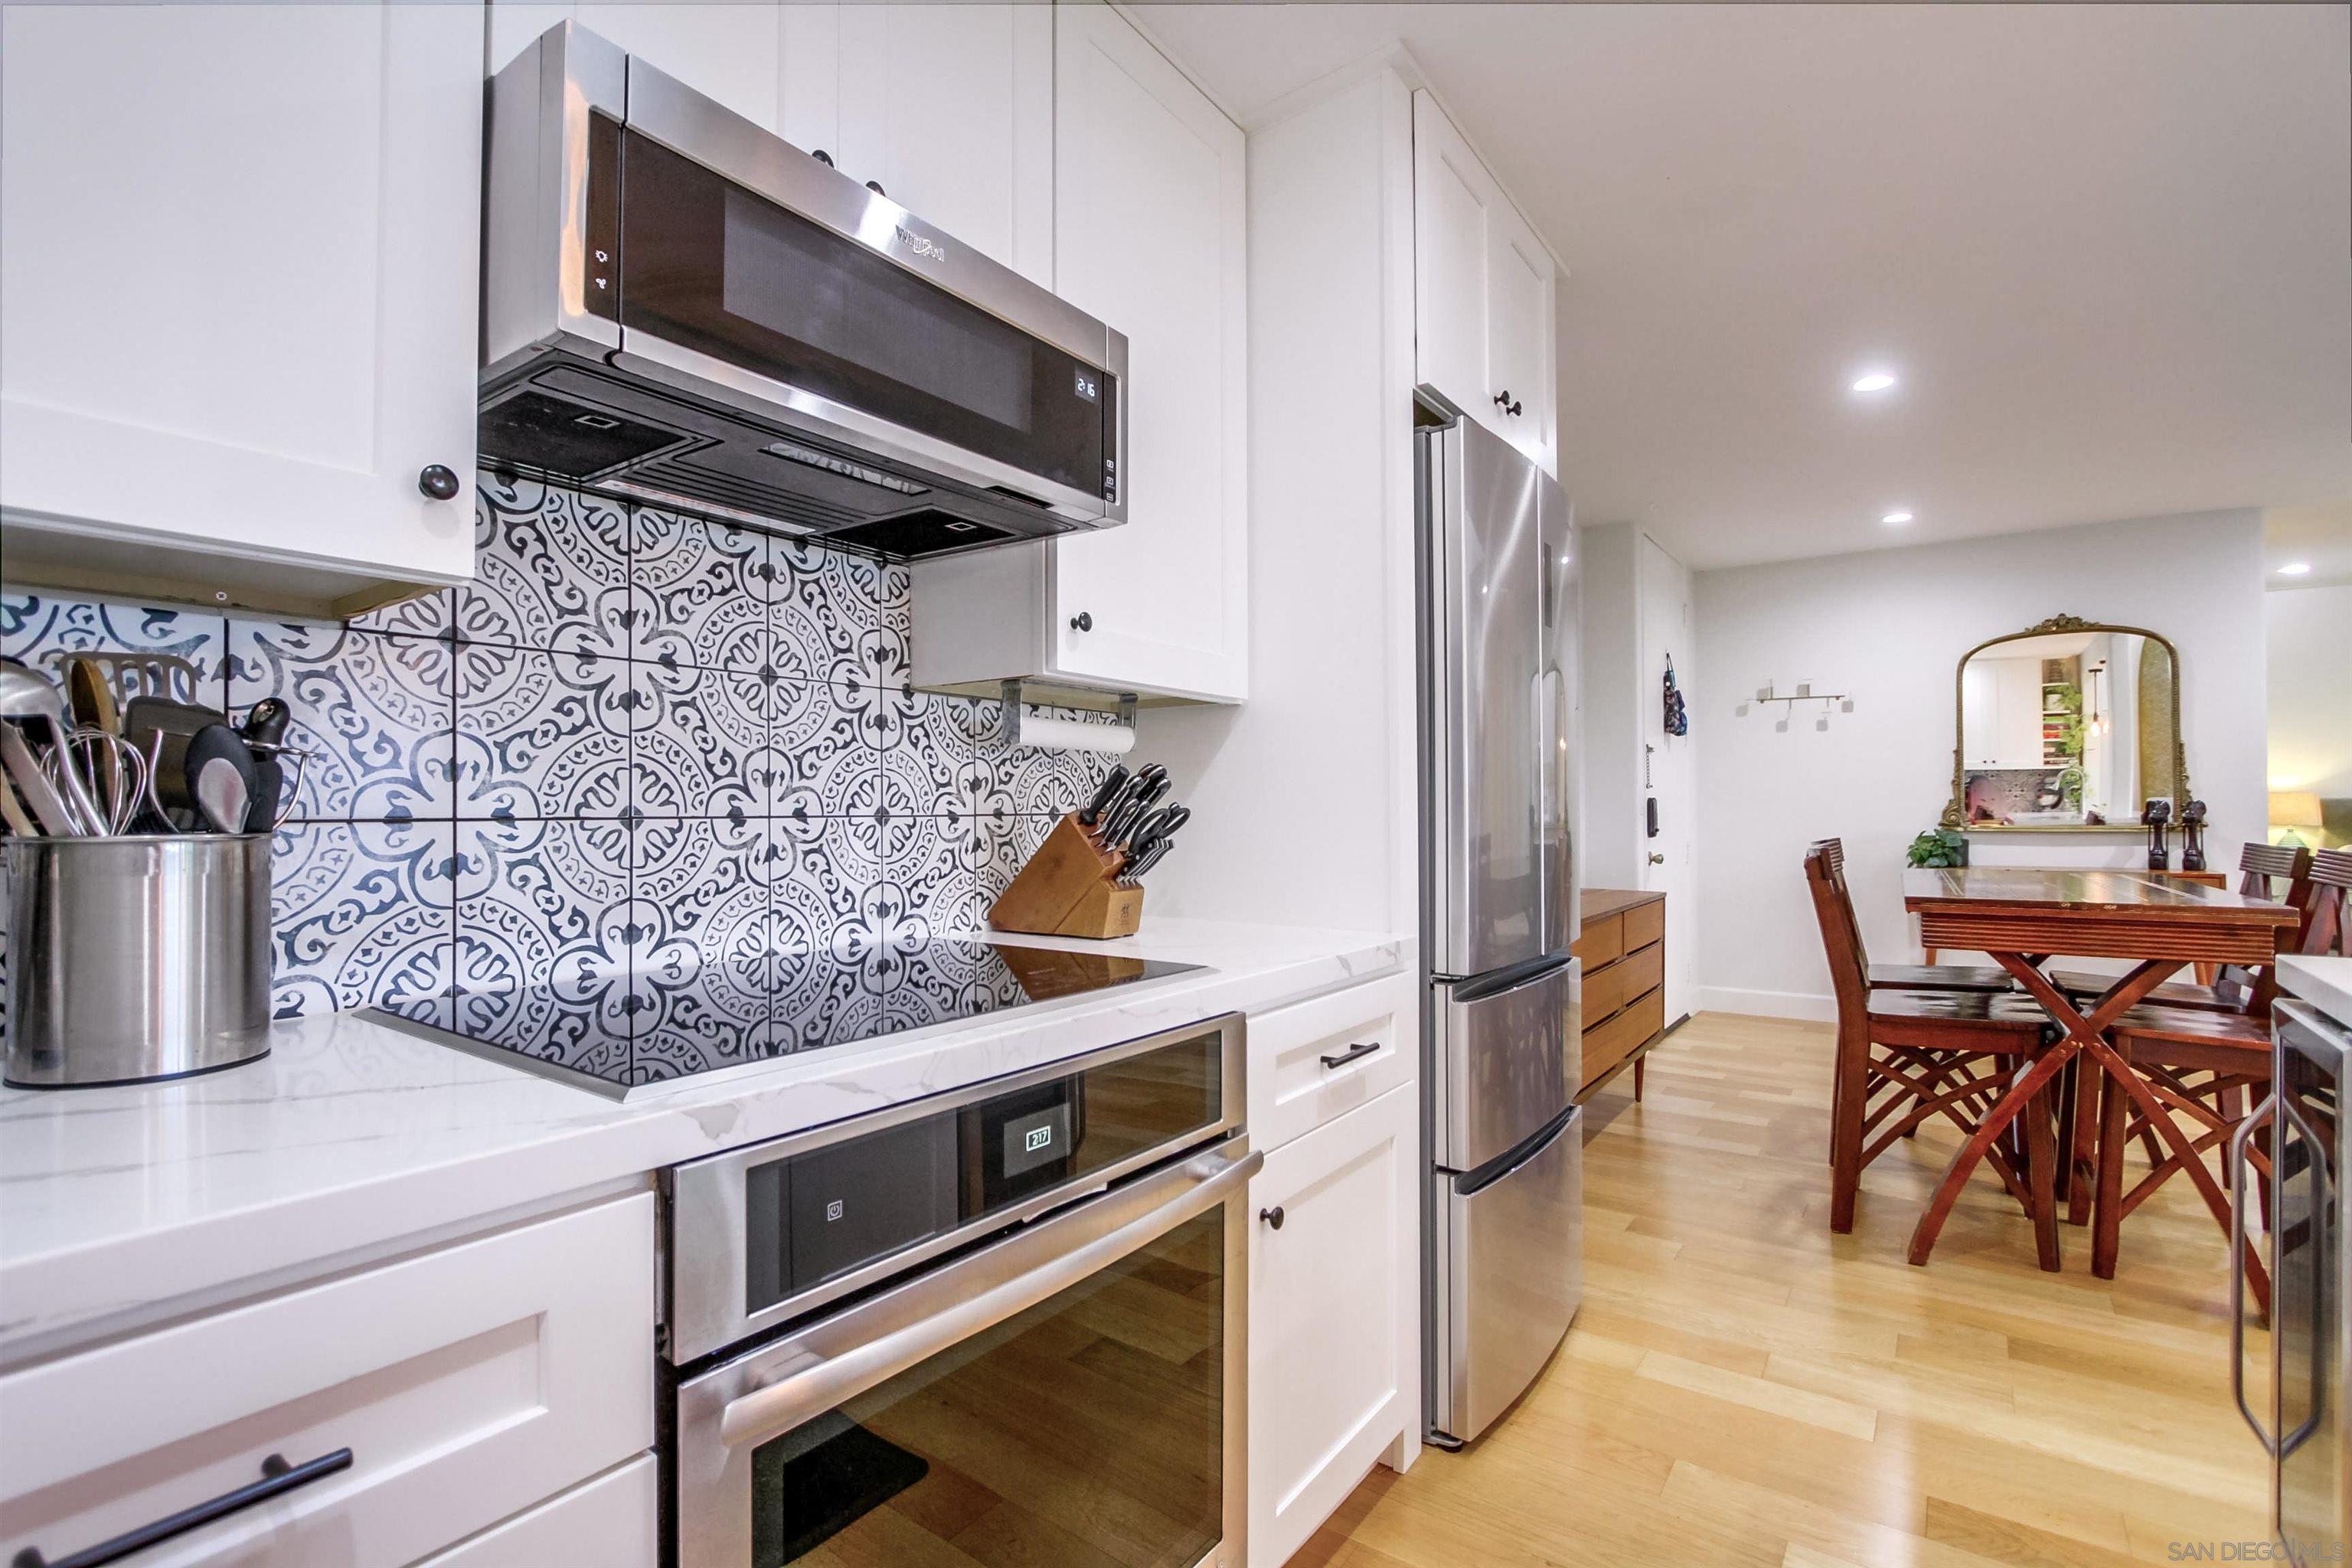 a kitchen with stainless steel appliances granite countertop a stove and a microwave